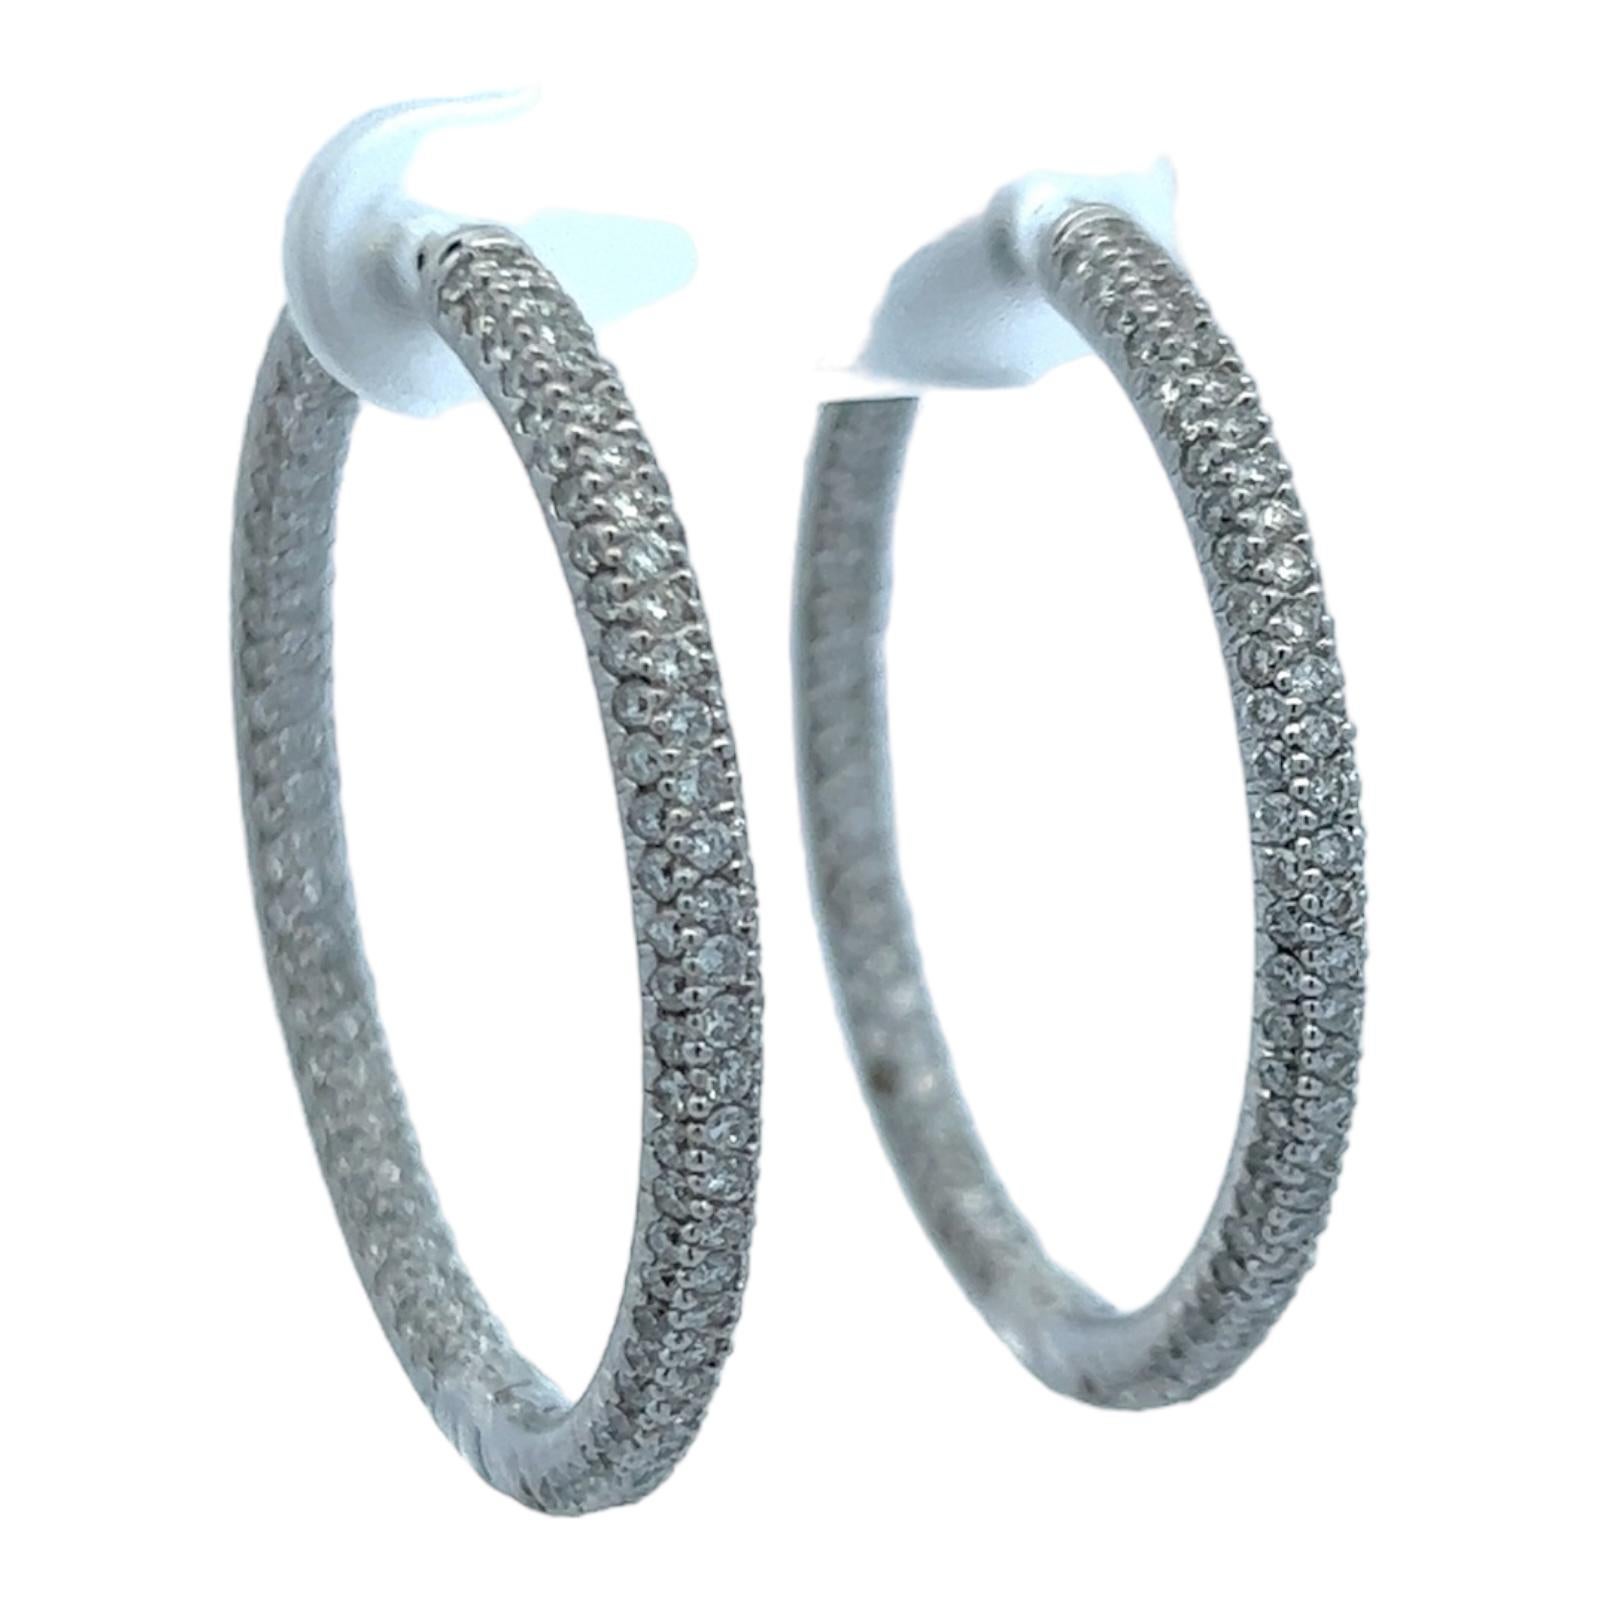 Modern diamond in & out hoop earrings crafted in 18 karat white gold. The hoops feature 3 rows of 362 round briliant cut diamonds weighing approximately 3.62 CTW and Graded H-I color and SI clarity. The 3mm hoops measure 1.25 inches in diameter. 